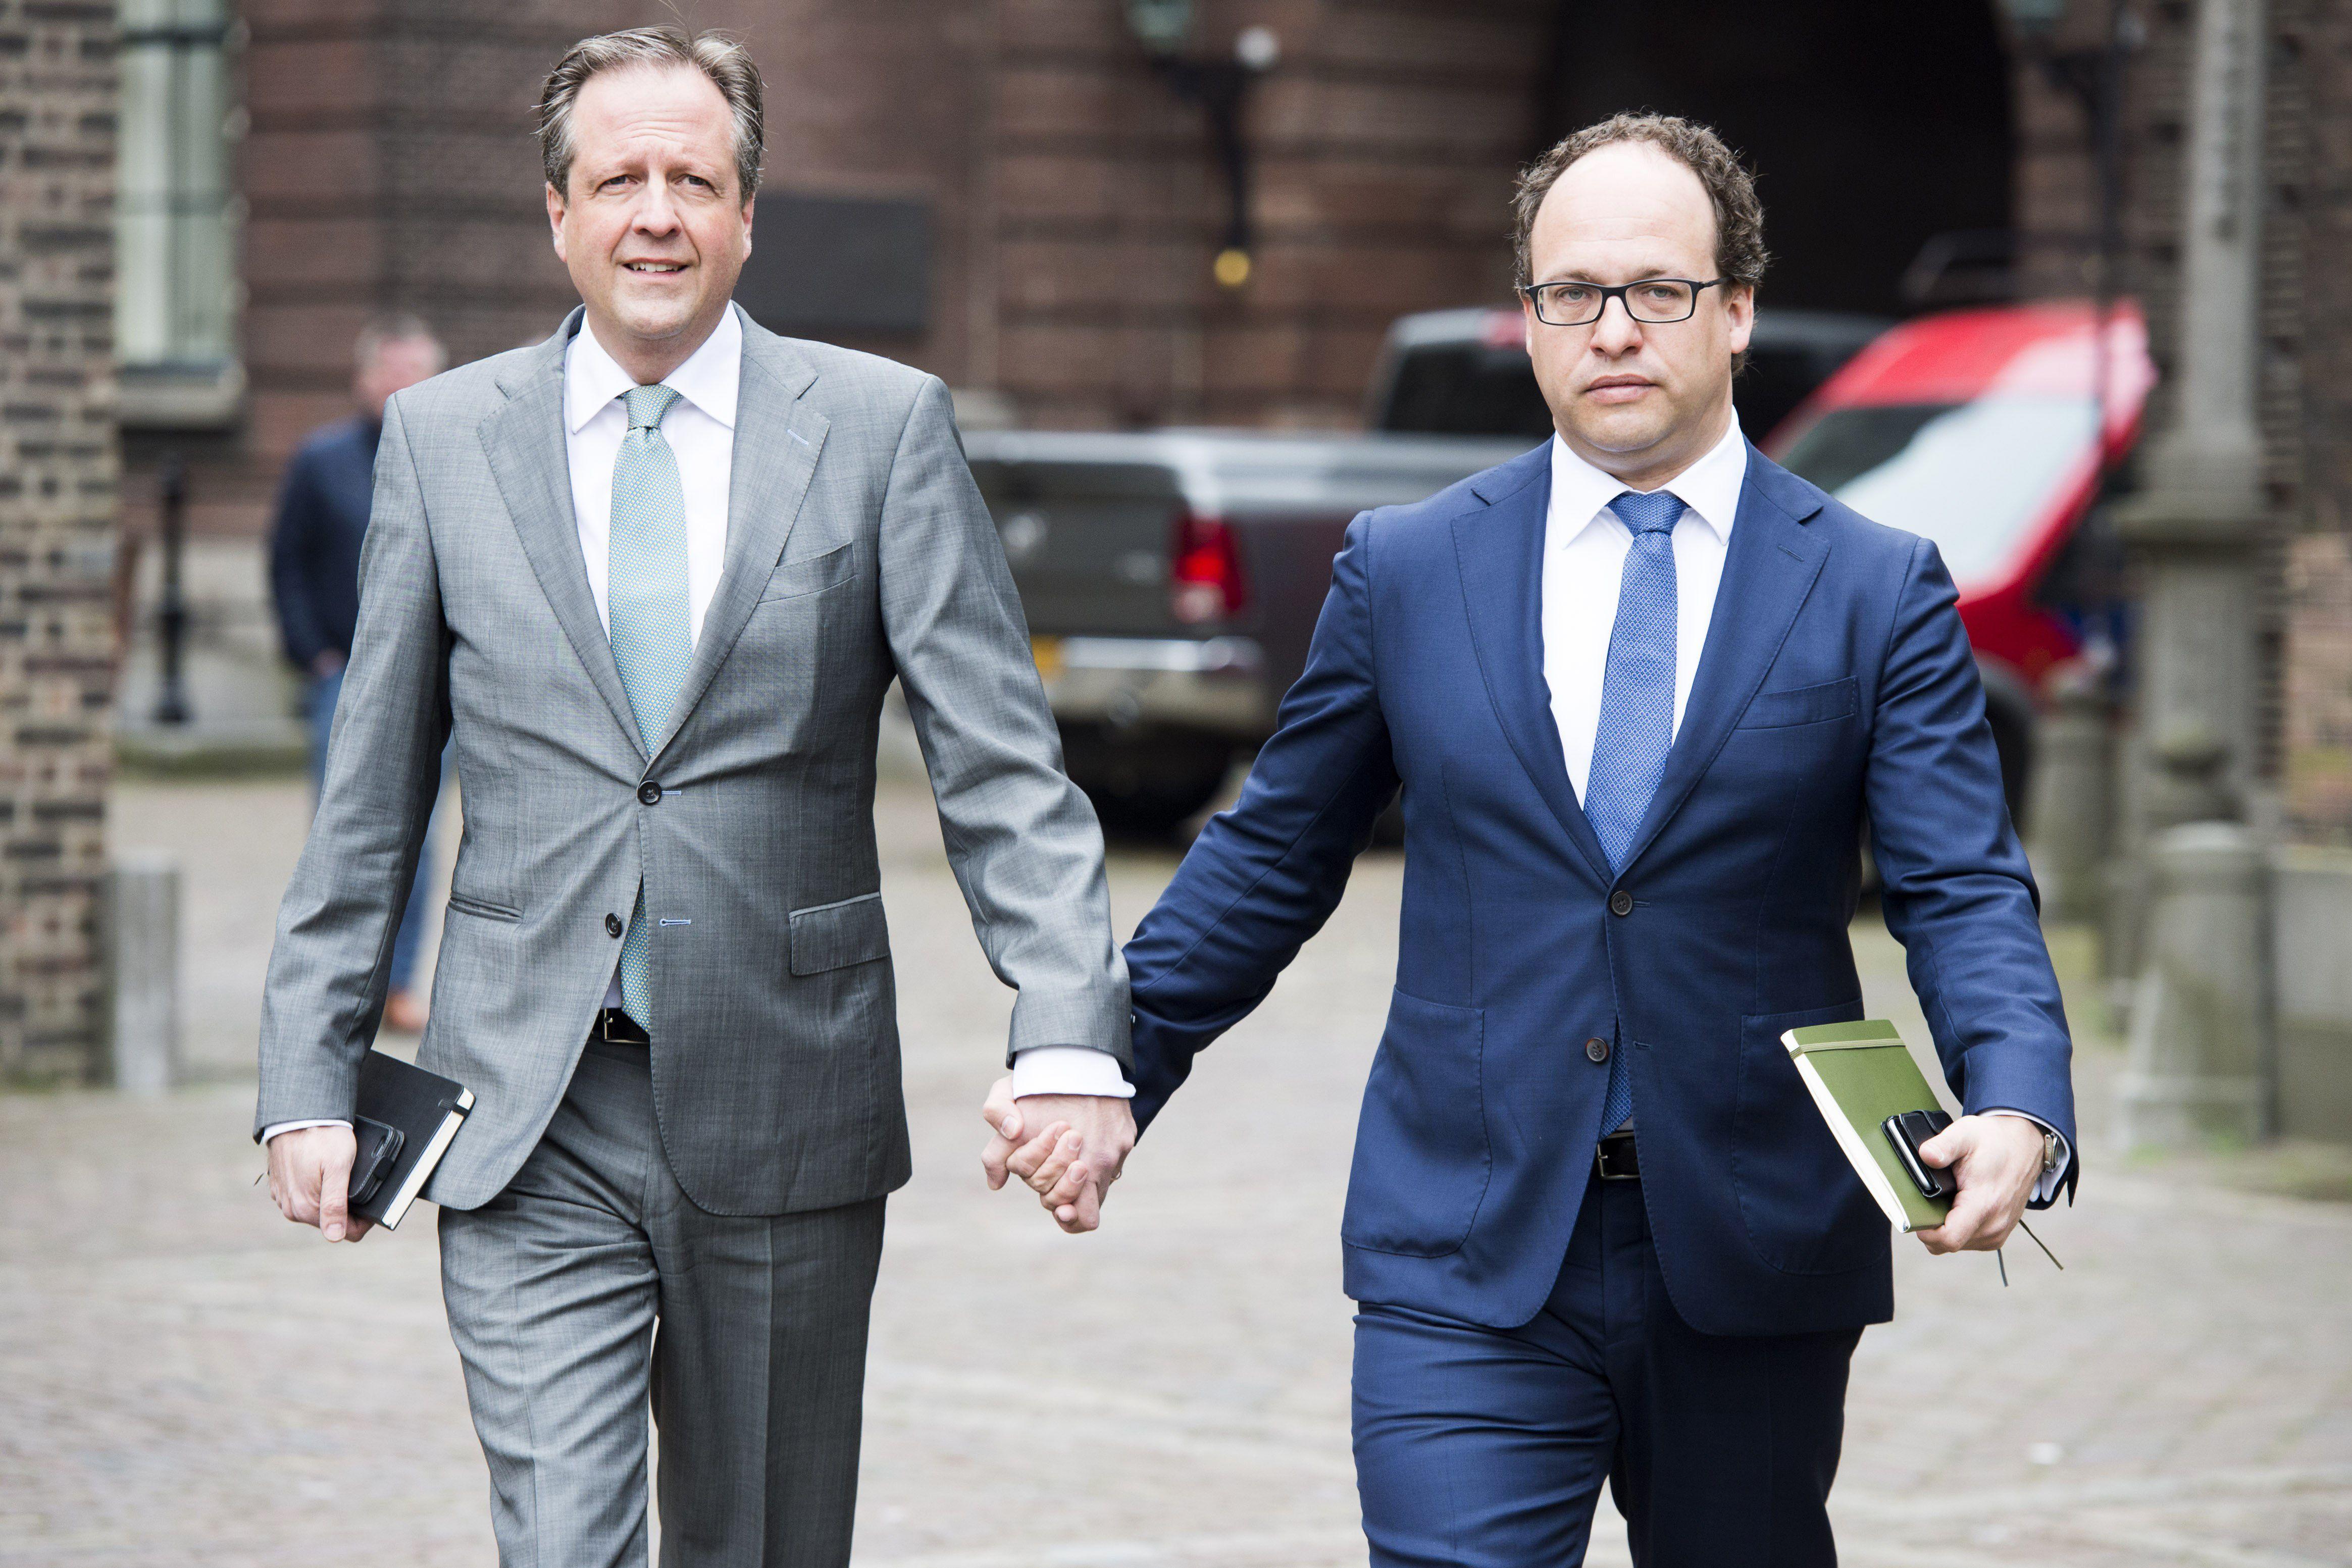 Dutch Men Across The World Hold Hands To Support Attacked